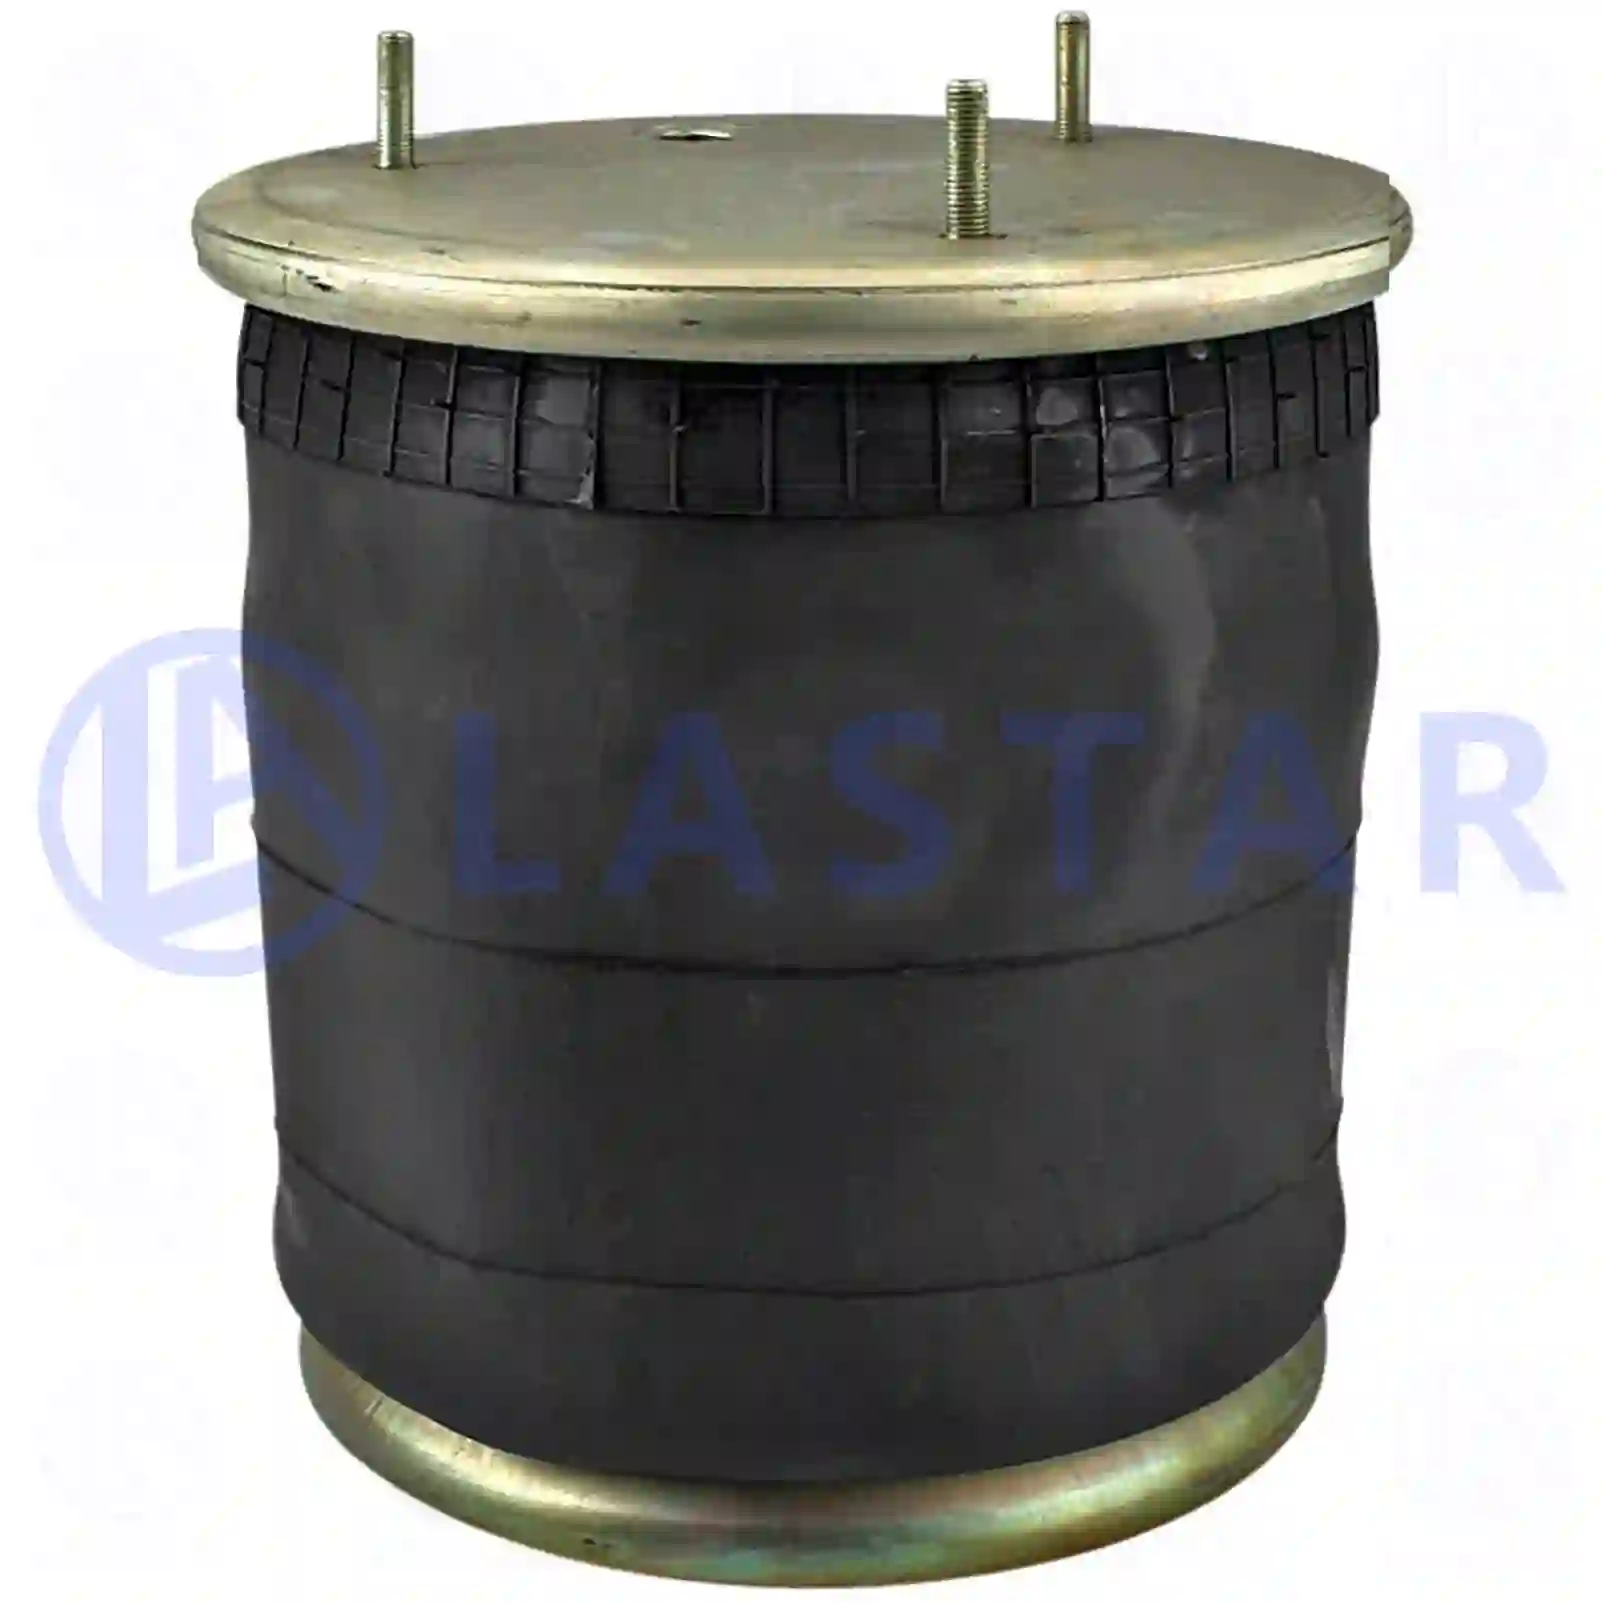 Air spring, with steel piston, 77727560, 0526823, 0676823, 526823, 676823, MLF7118, ZG40781-0008 ||  77727560 Lastar Spare Part | Truck Spare Parts, Auotomotive Spare Parts Air spring, with steel piston, 77727560, 0526823, 0676823, 526823, 676823, MLF7118, ZG40781-0008 ||  77727560 Lastar Spare Part | Truck Spare Parts, Auotomotive Spare Parts